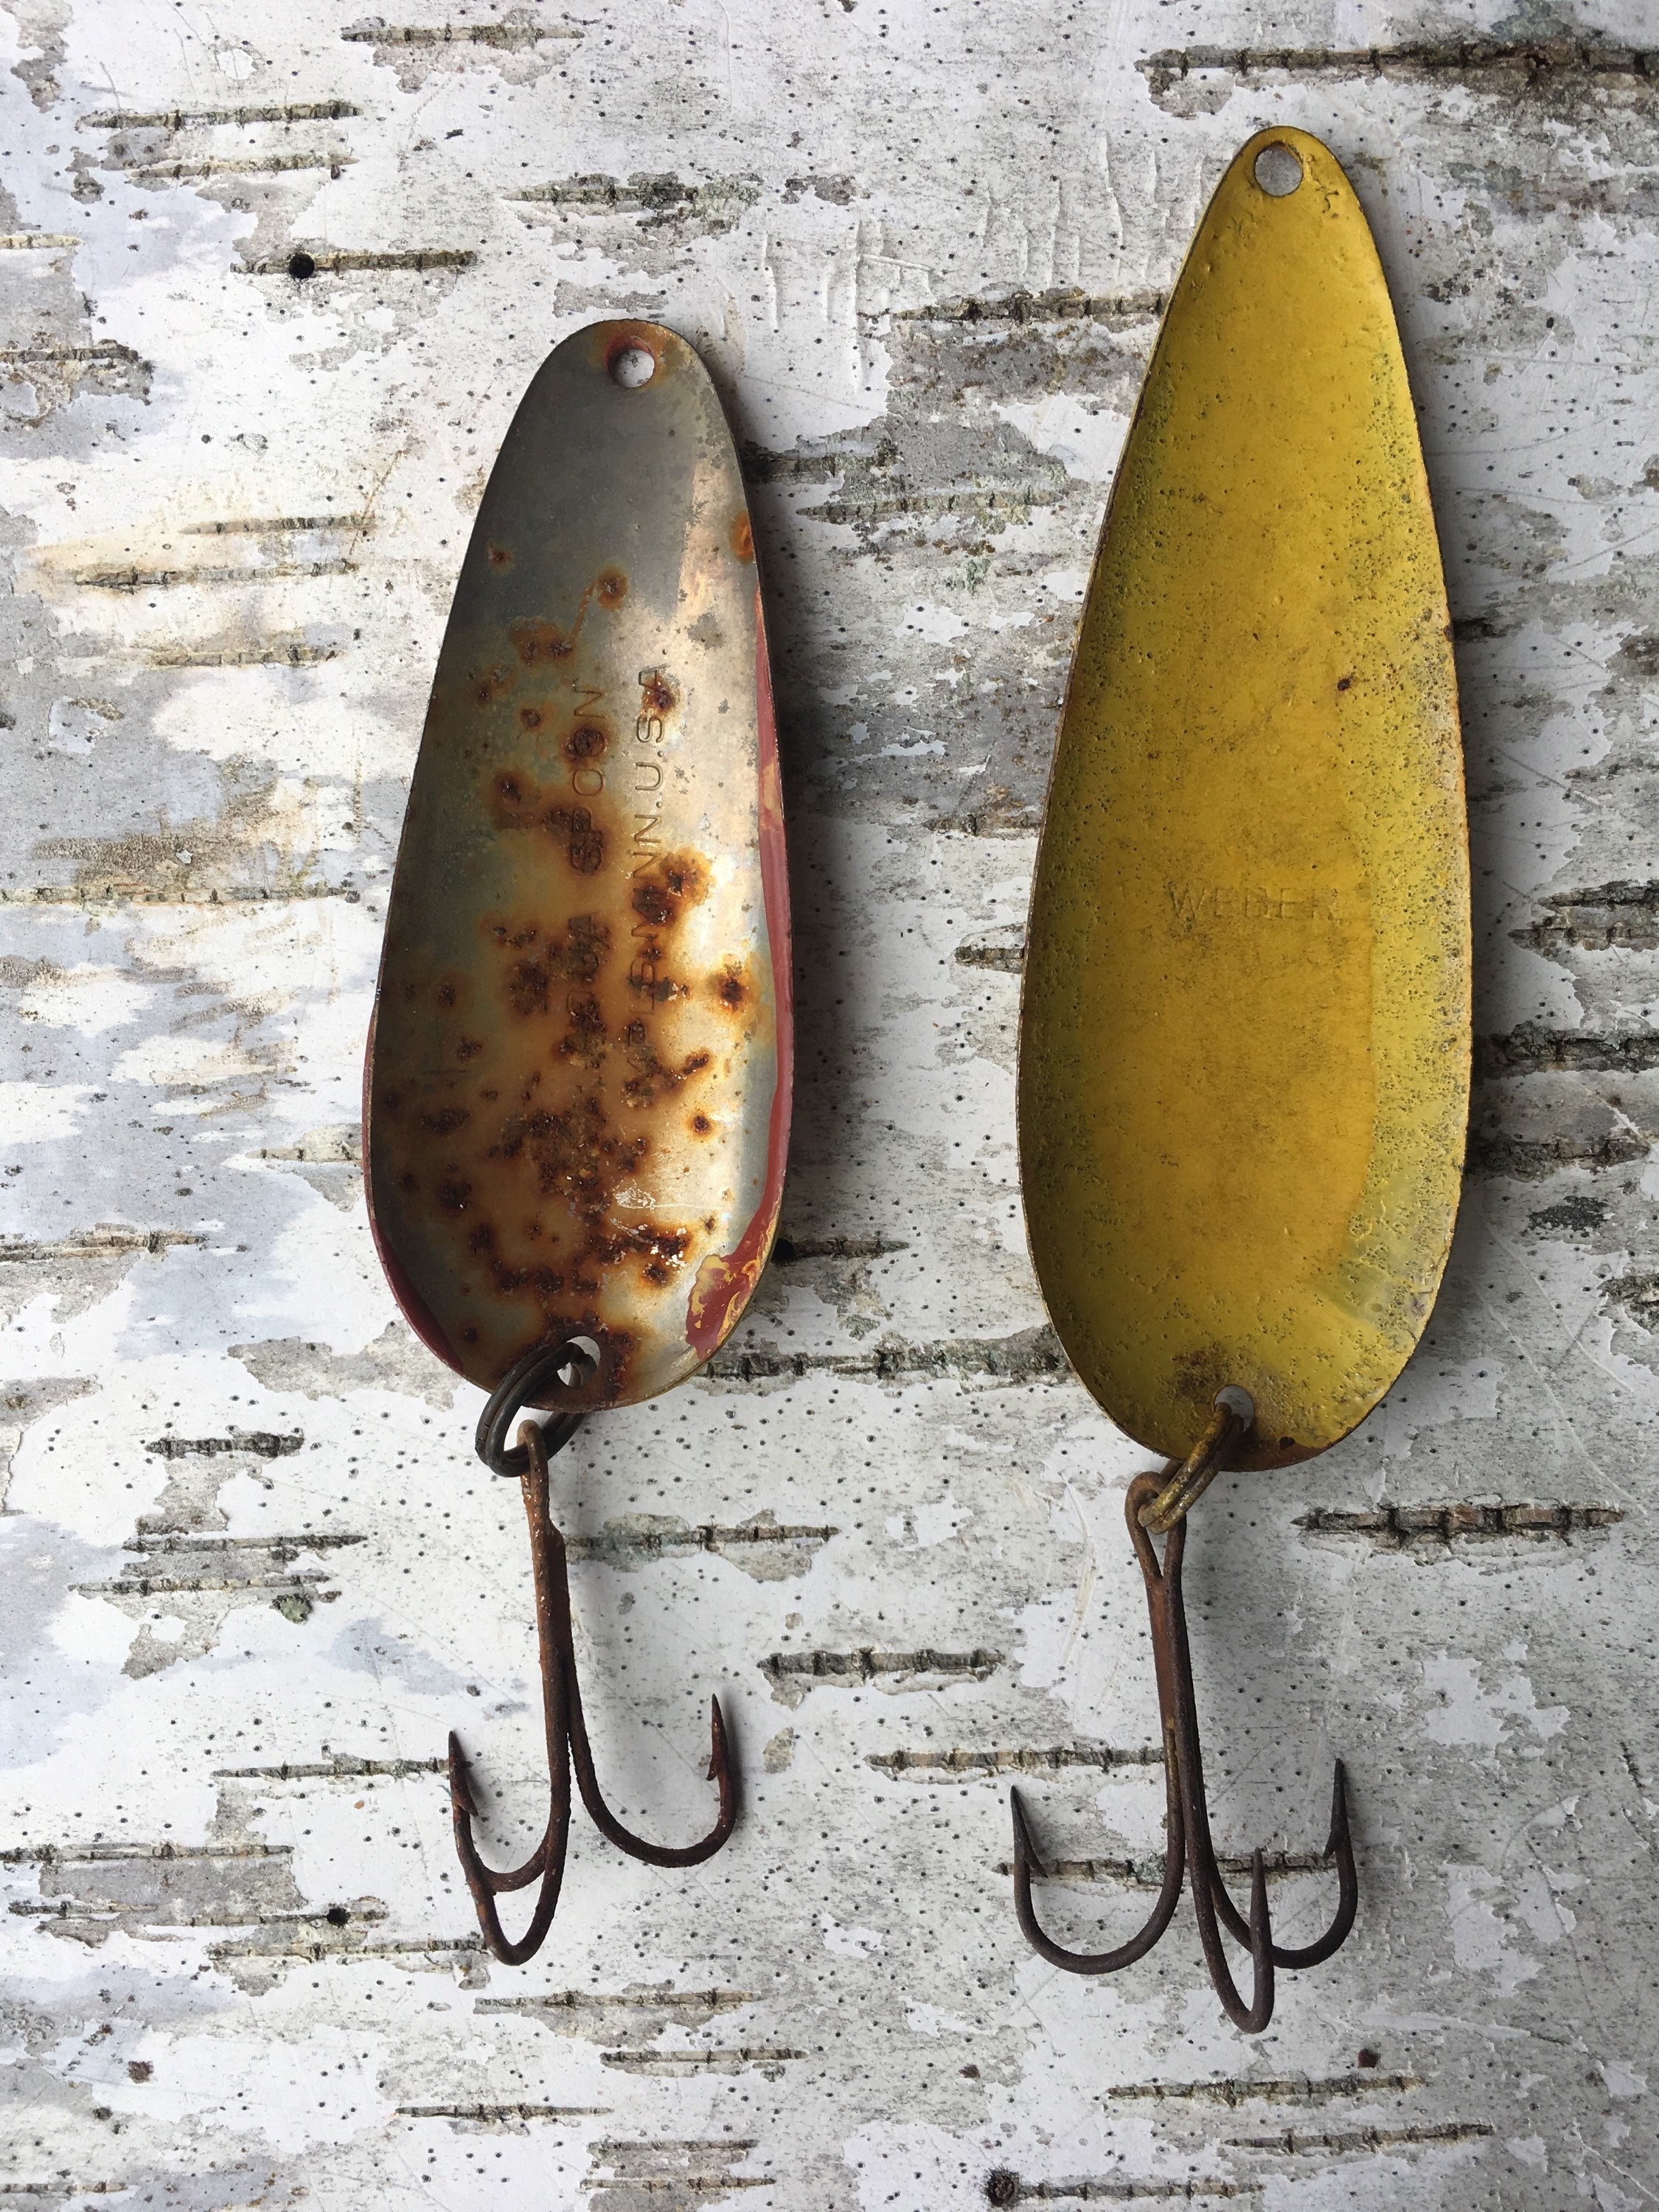 Fishing Lure Set Daredevil Spoon Lot Weber Fish Old Antique